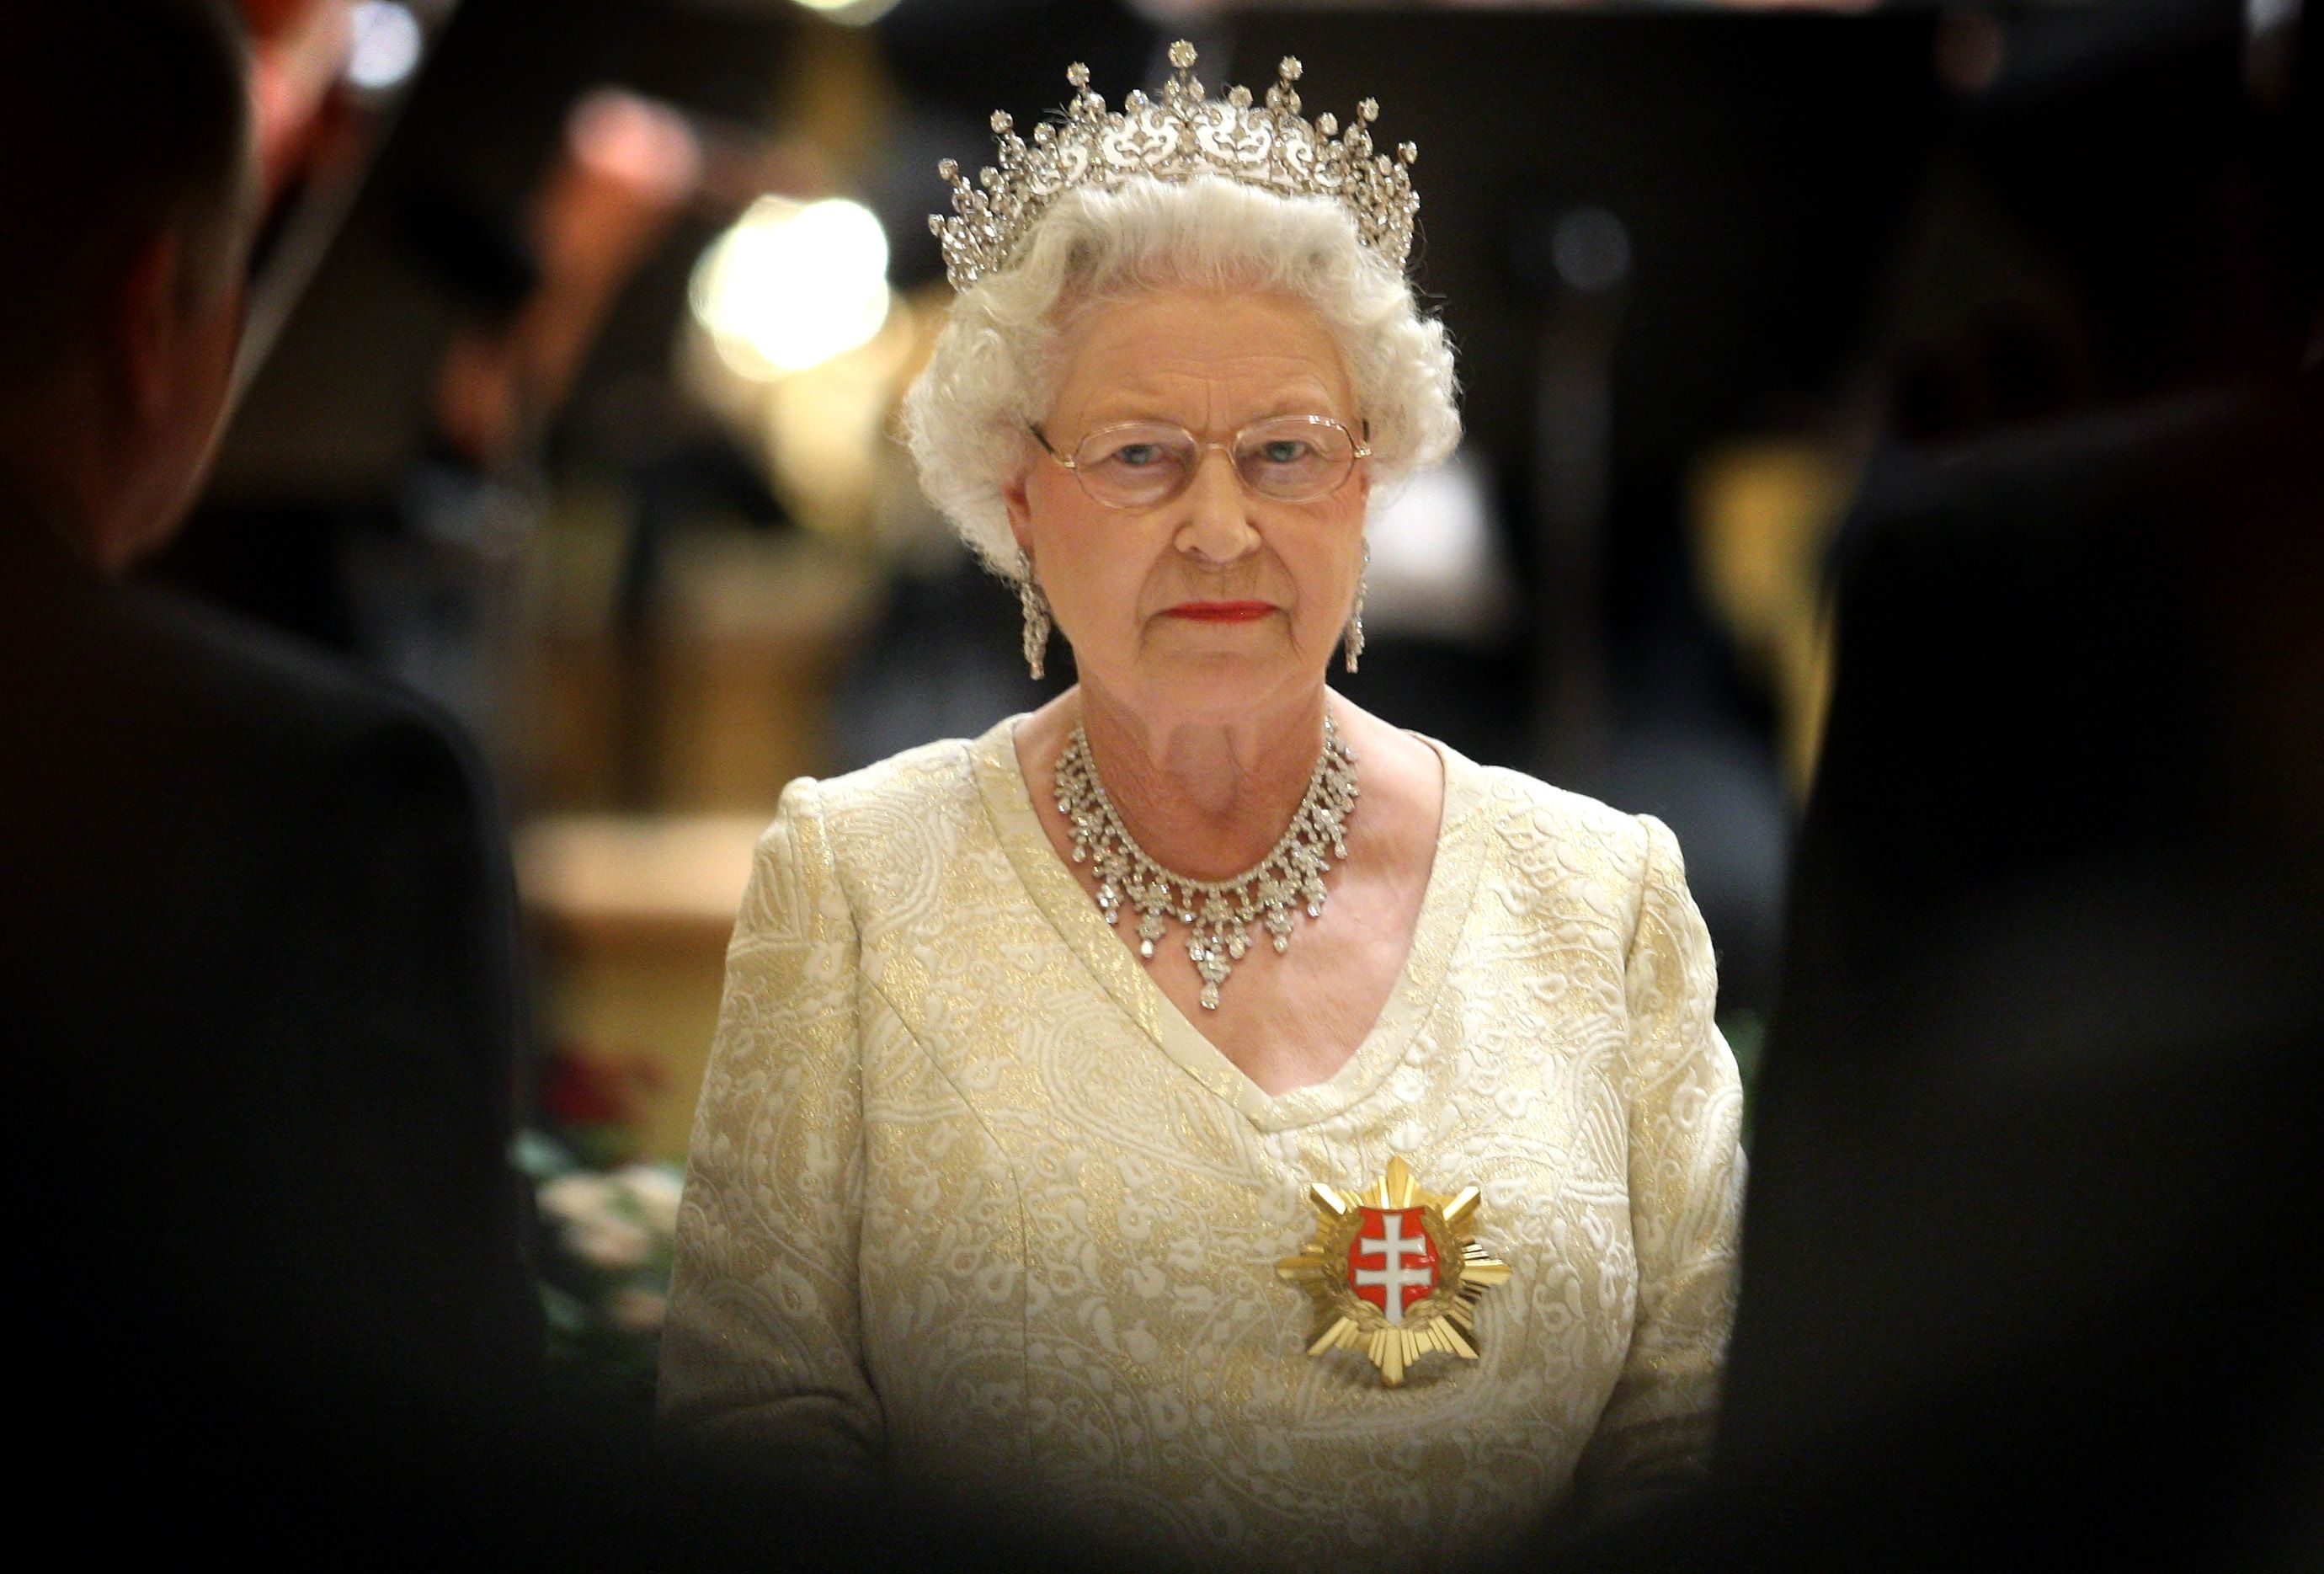 Queen Elizabeth II at a State Banquet on October 23, 2008 in Bratislava, Slovakia | Photo: Getty Images